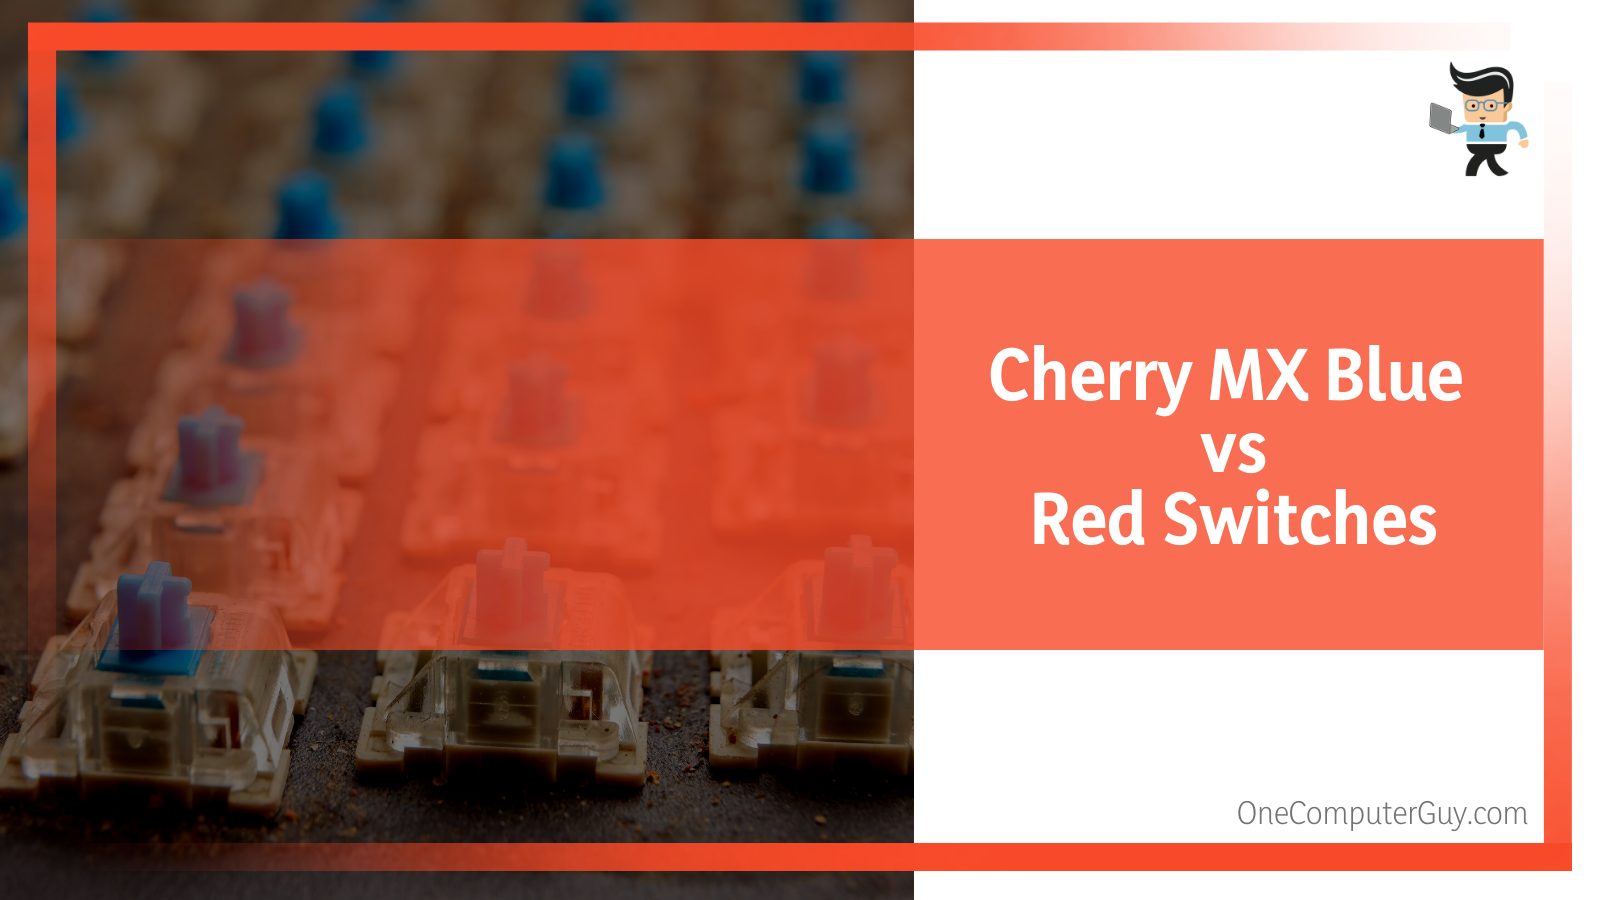 Cherry MX Blue vs Red Switches